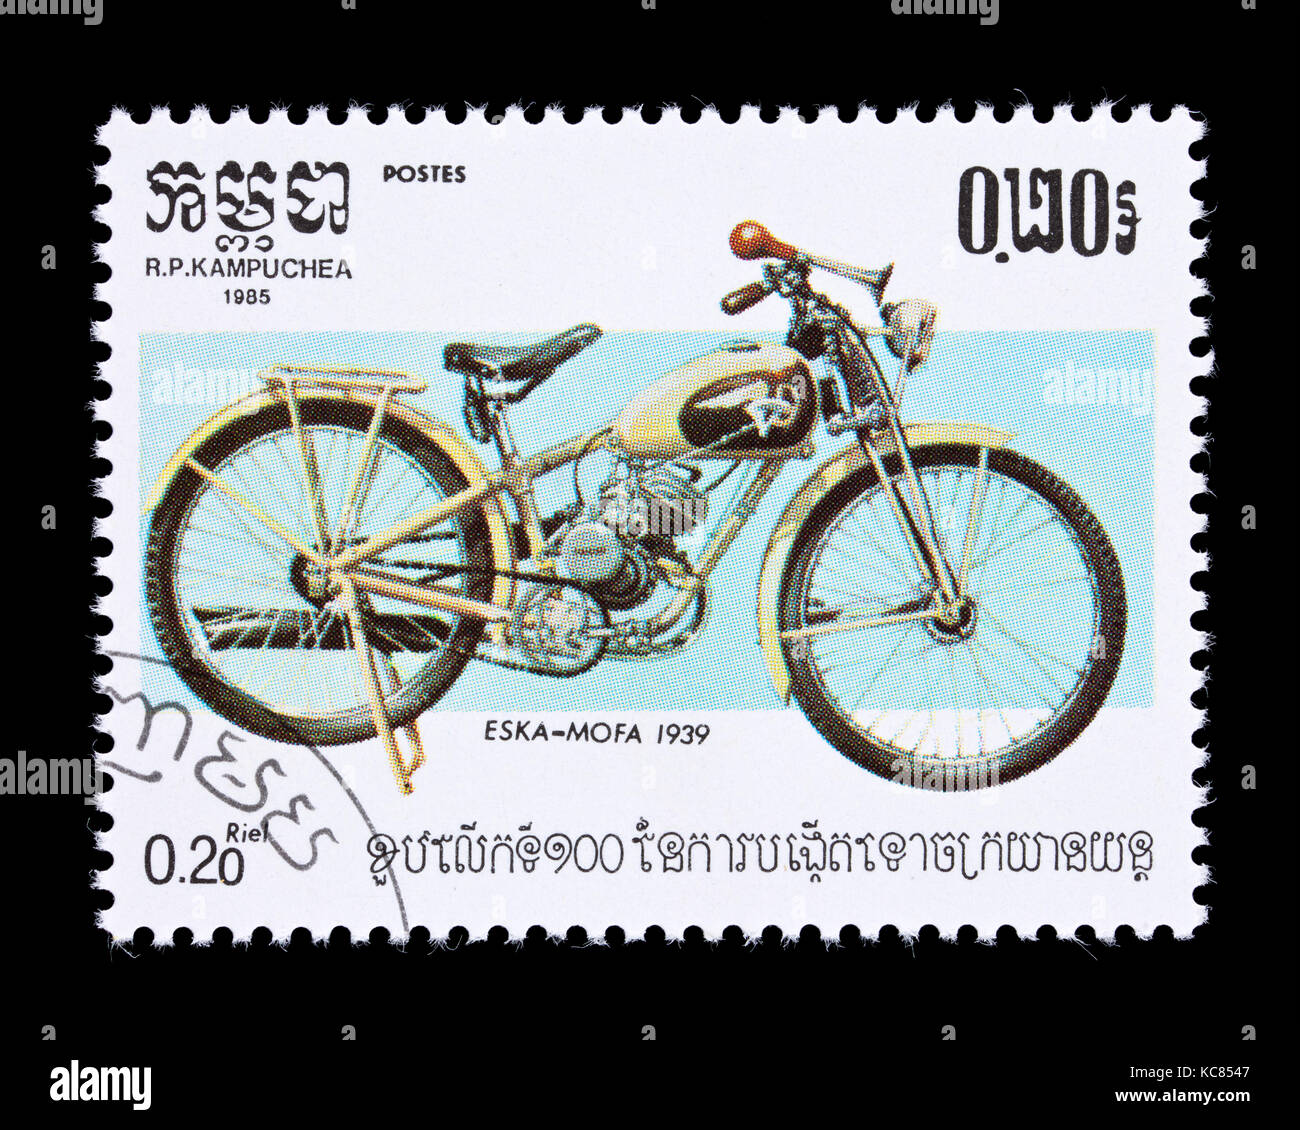 Postage stamp from Cambodia (Kampuchea) depicting a 1939 Eska-Mofa motorcycle Stock Photo